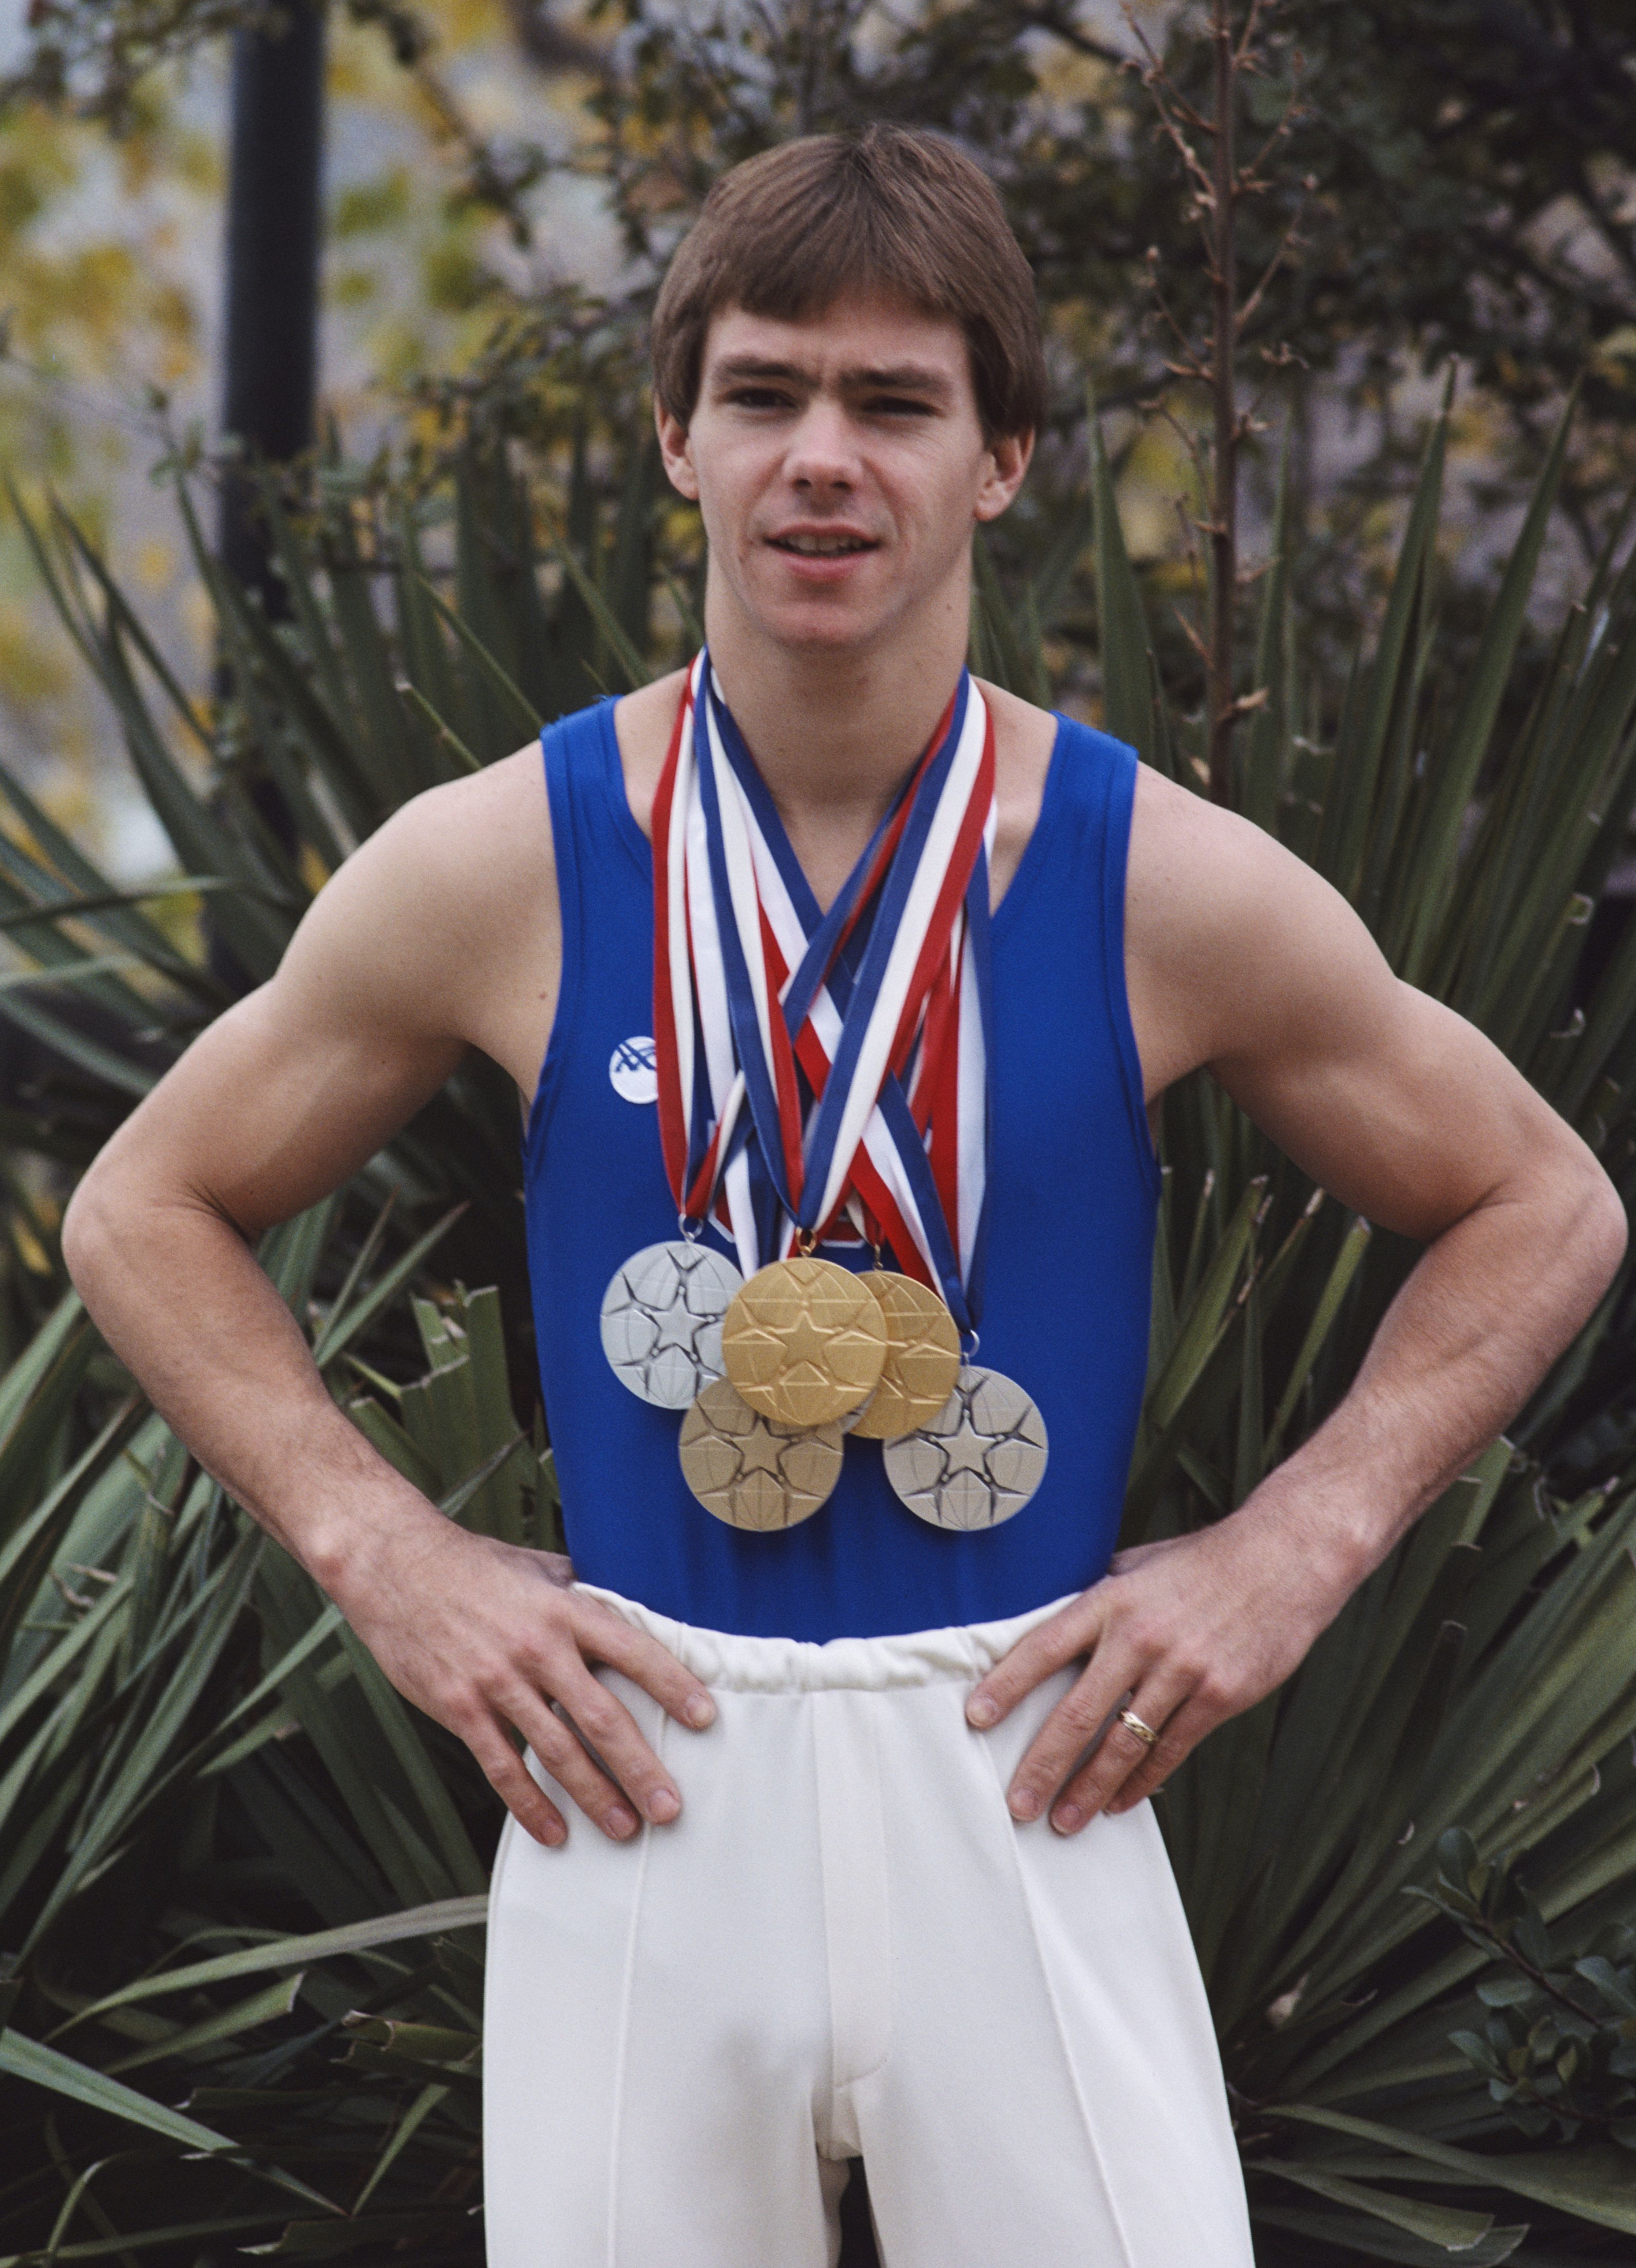 Kurt Thomas of the United States posing with his medals on during the 20th Artistic Gymnastics World Championships in Fort Worth, Texas, United States | Photo: Tony Duffy/Getty Images